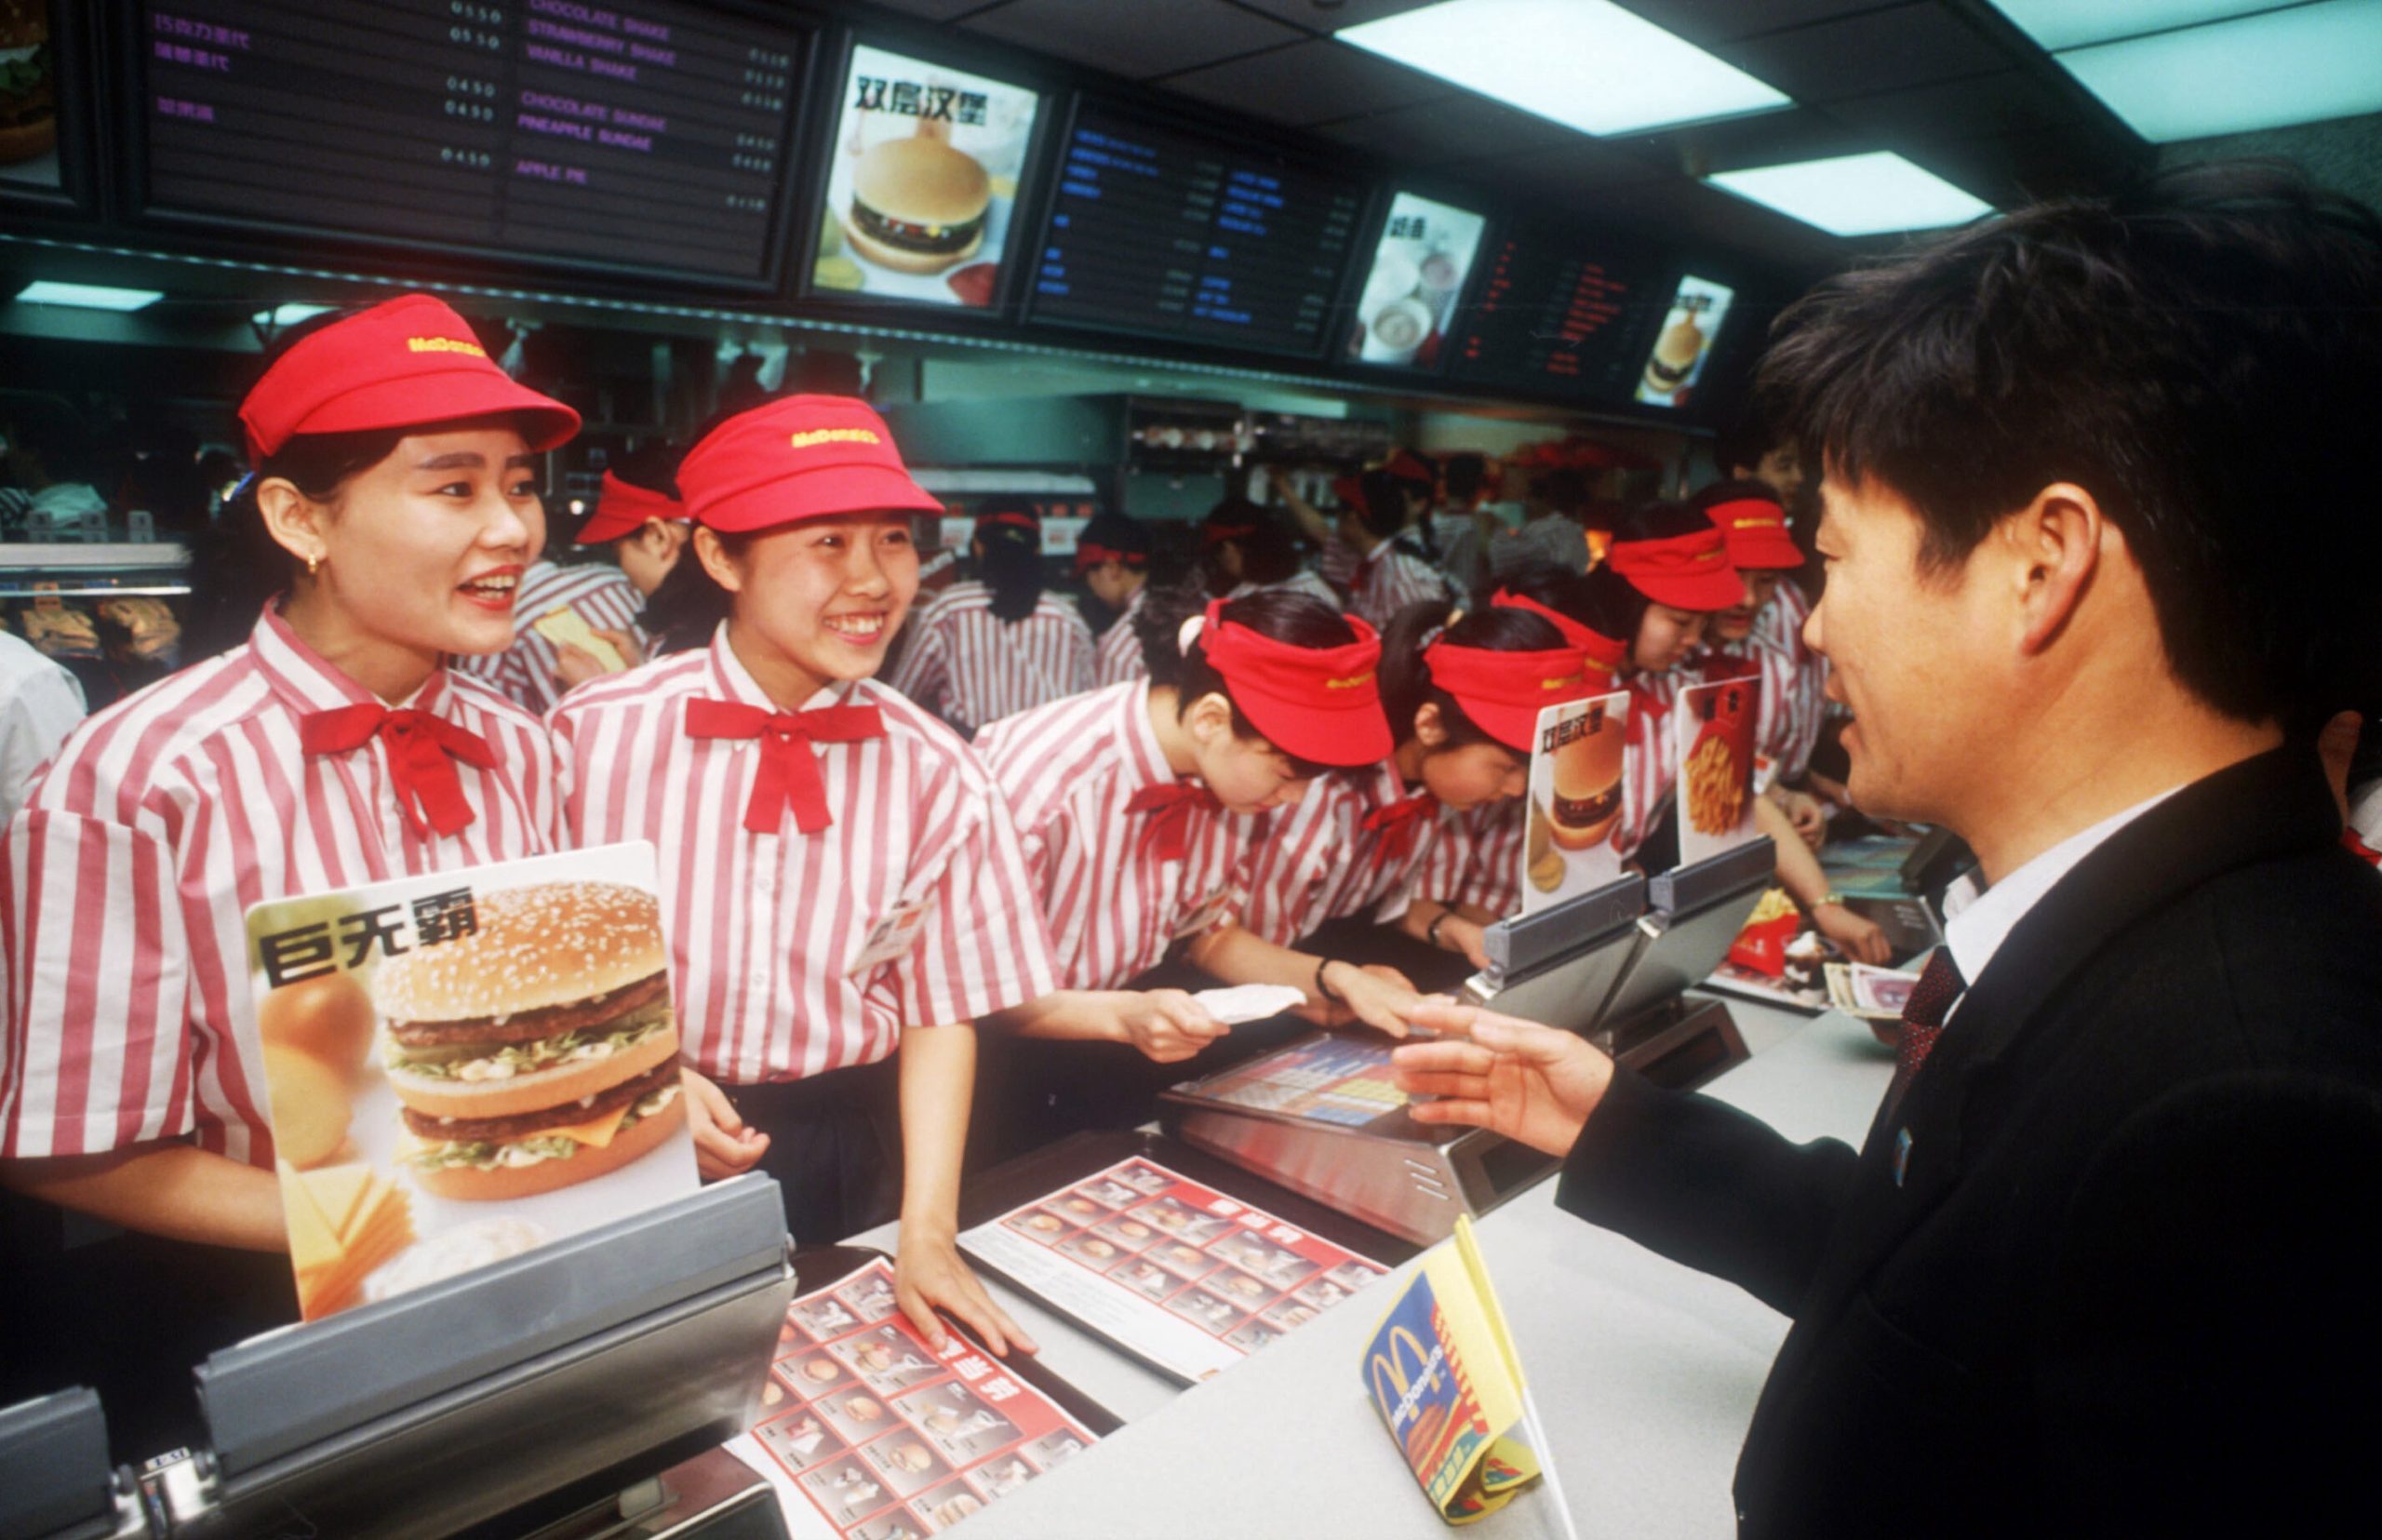 mcdonald's in china case study